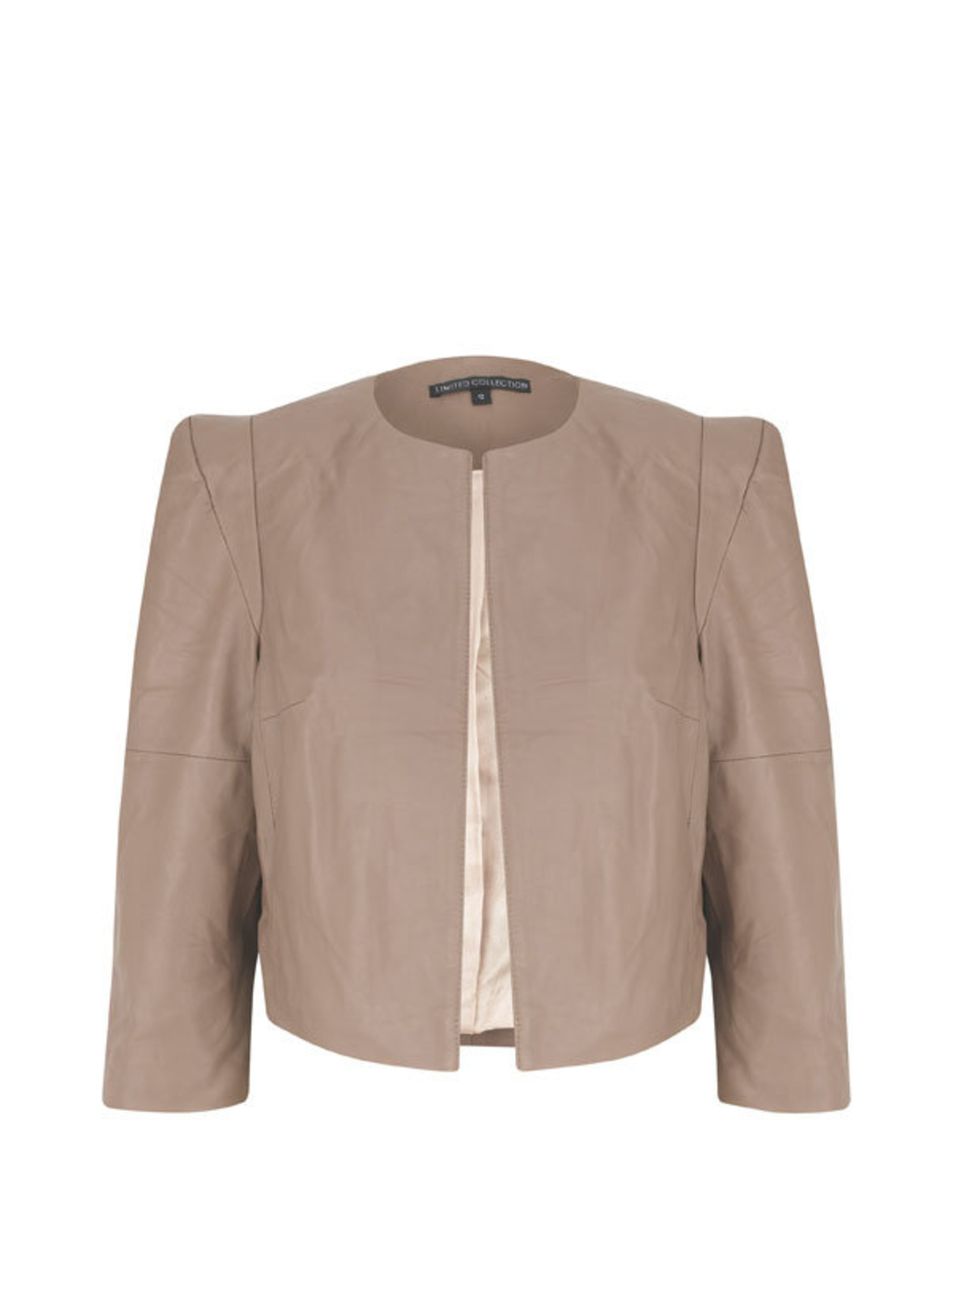 <p> If youre looking for new design talent then head to M&amp;S this week. The winning design from the collaboration between ELLEuk.com, M&amp;S and the Royal College of Art comes in the shape of this beautifully tailored leather jacket by Anna Smit. RCA